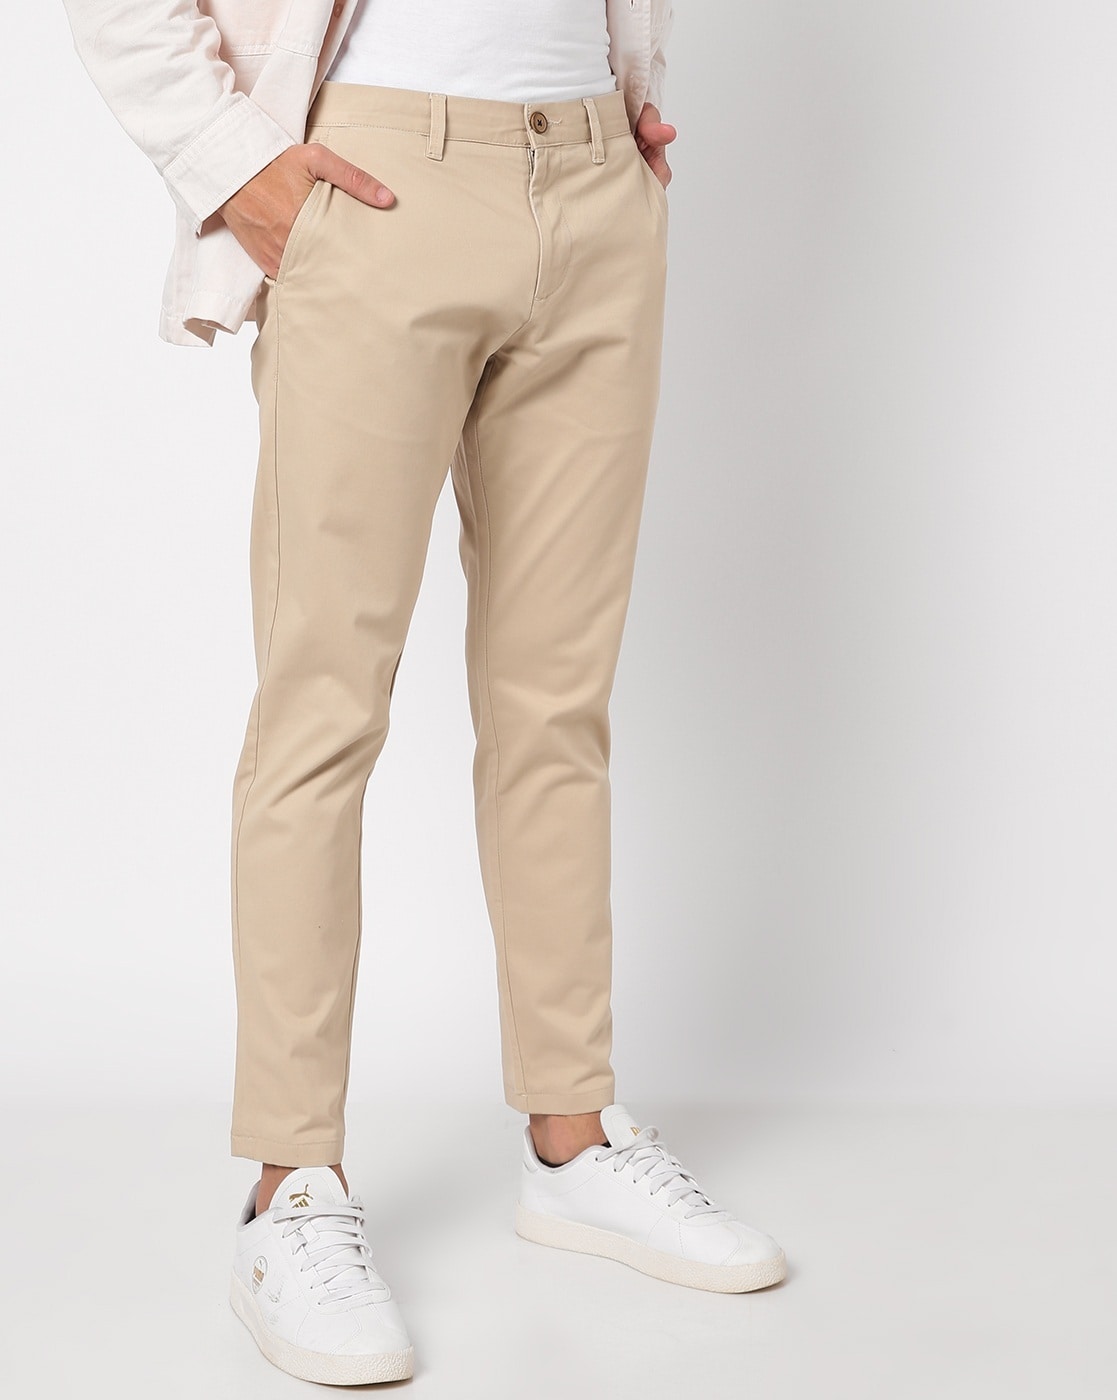 Buy Olive Brown Trousers  Pants for Men by NETPLAY Online  Ajiocom